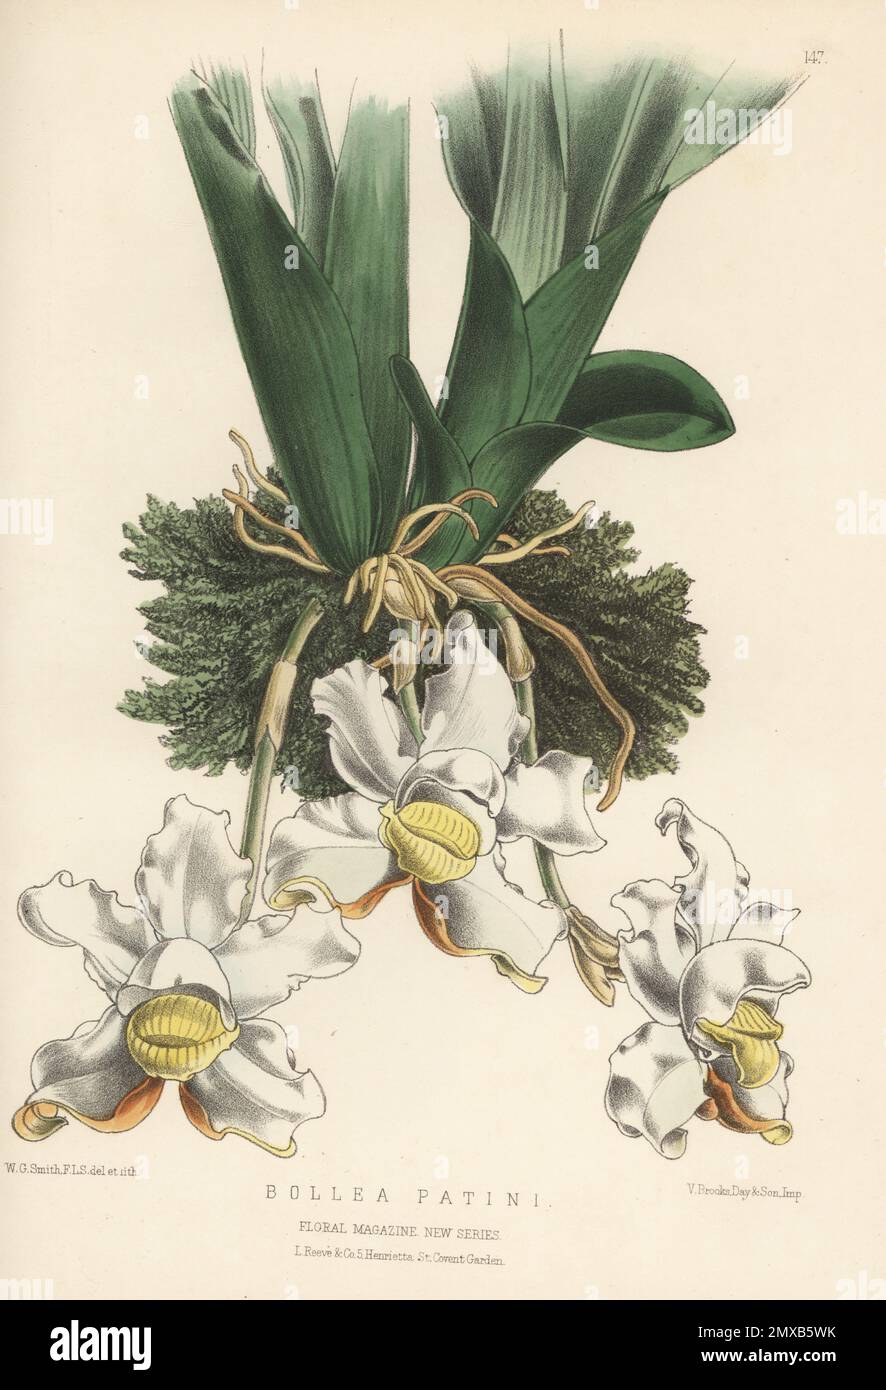 Pescatoria lalindei orchid, native to Costa Rica, Panama and South America. As Bollea patini, named for plant collector Mr. C. Patin who found it in New Granada in 1873. Handcolored botanical illustration drawn and lithographed by Worthington George Smith from Henry Honywood Dombrain's Floral Magazine, New Series, Volume 4, L. Reeve, London, 1875. Lithograph printed by Vincent Brooks, Day & Son. Stock Photo